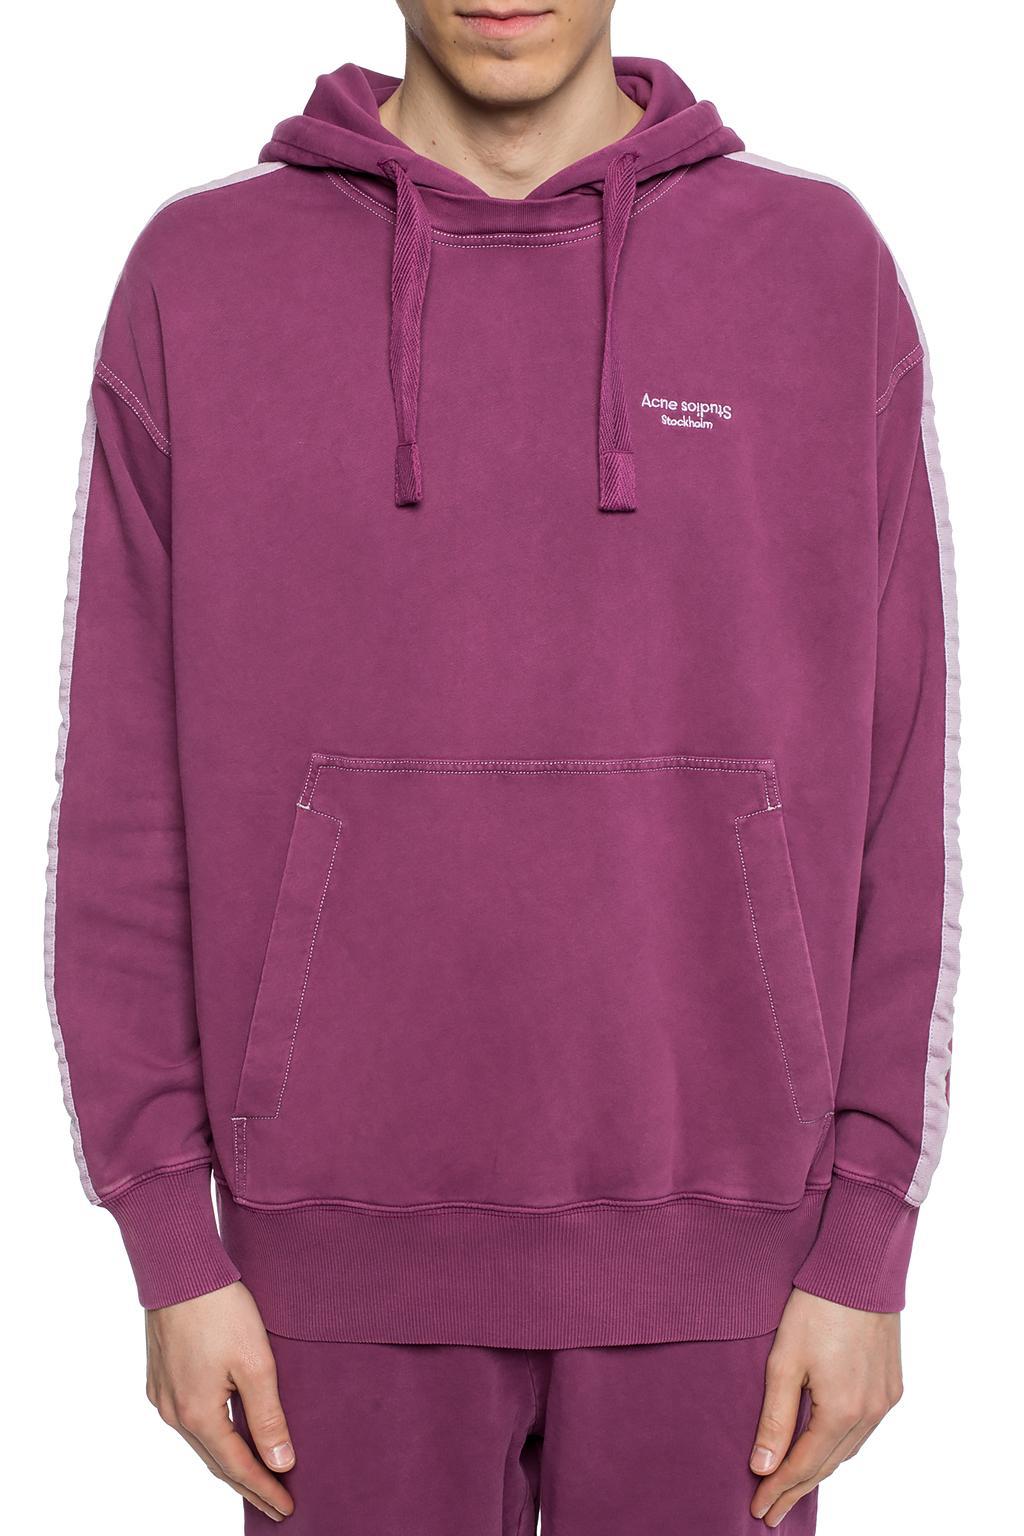 Acne Studios Cotton Logo-embroidered Hoodie in Purple for Men - Lyst